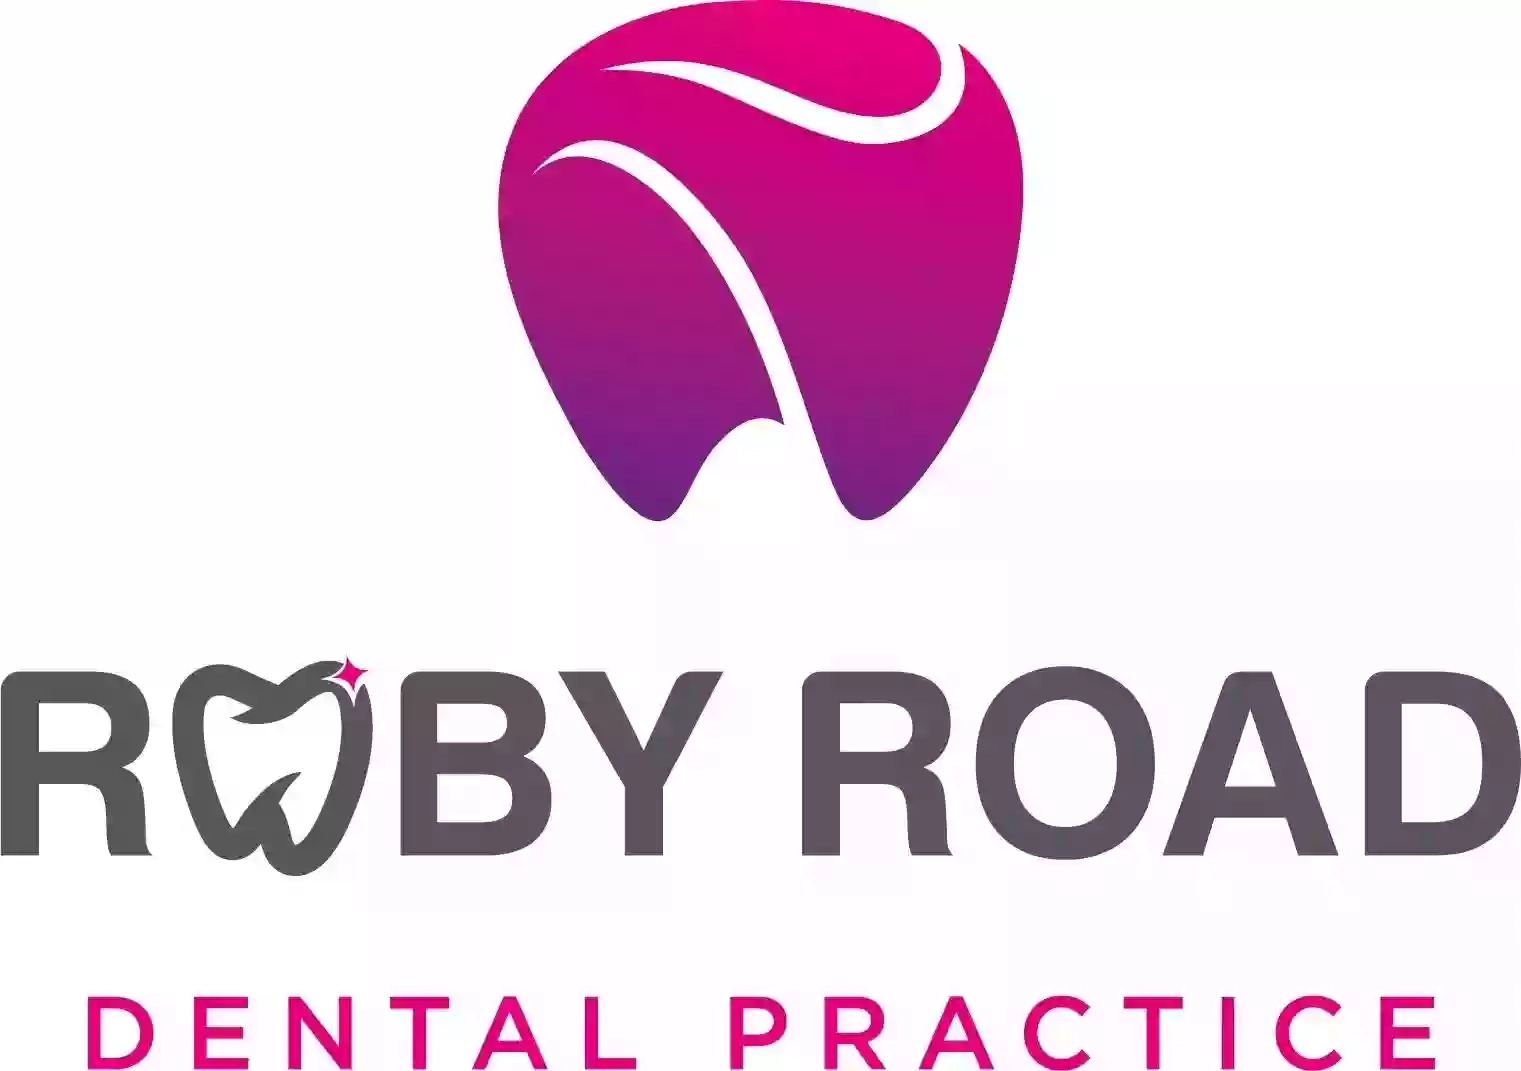 Roby Road Dental Practice